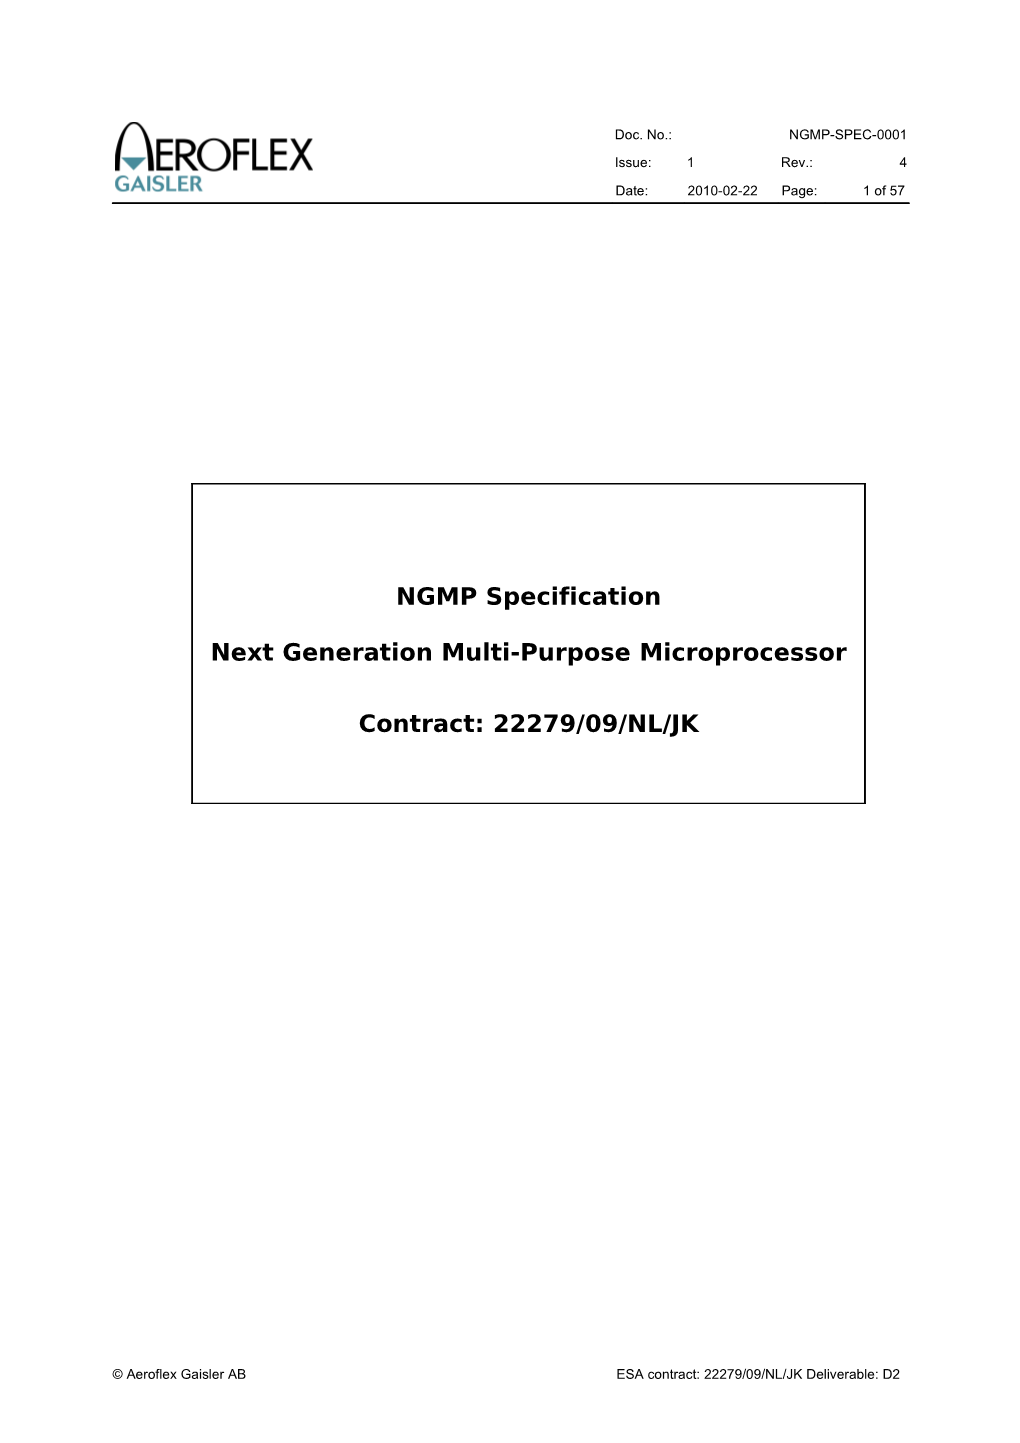 Preliminary NGMP Specification